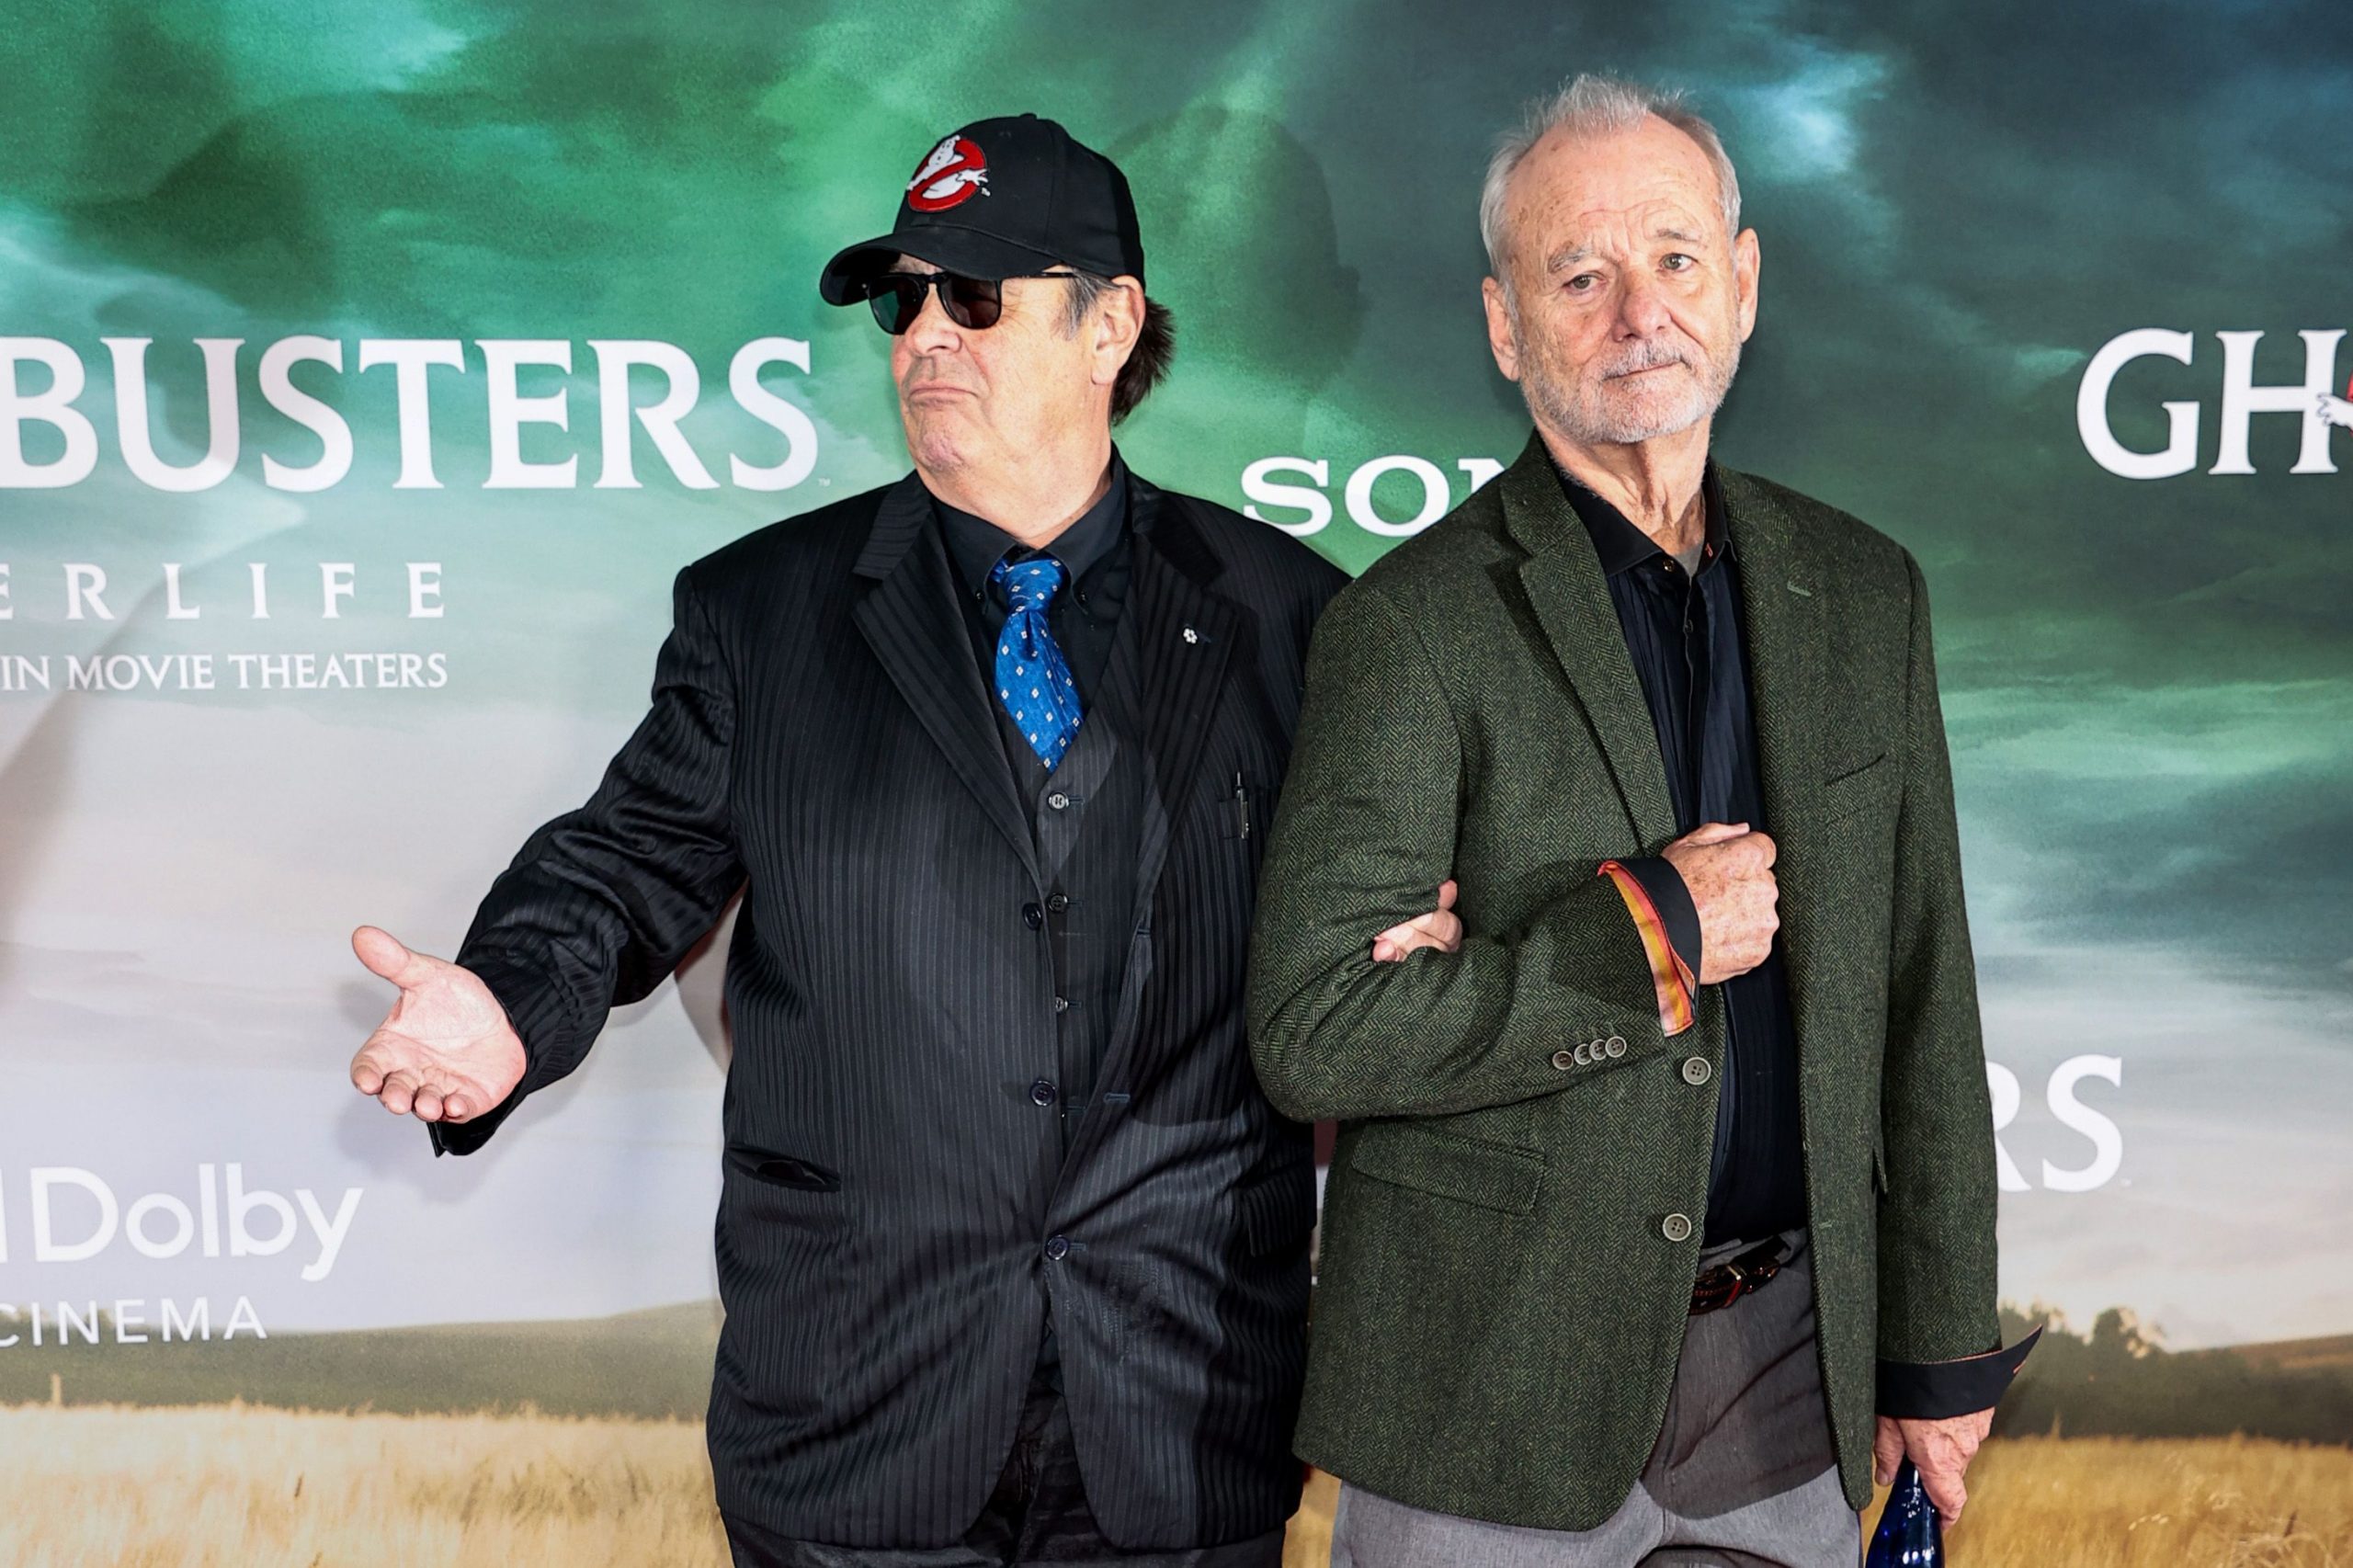 Bill Murray Says ‘Ghostbusters: Afterlife’ is ‘More Emotional’ than the Original